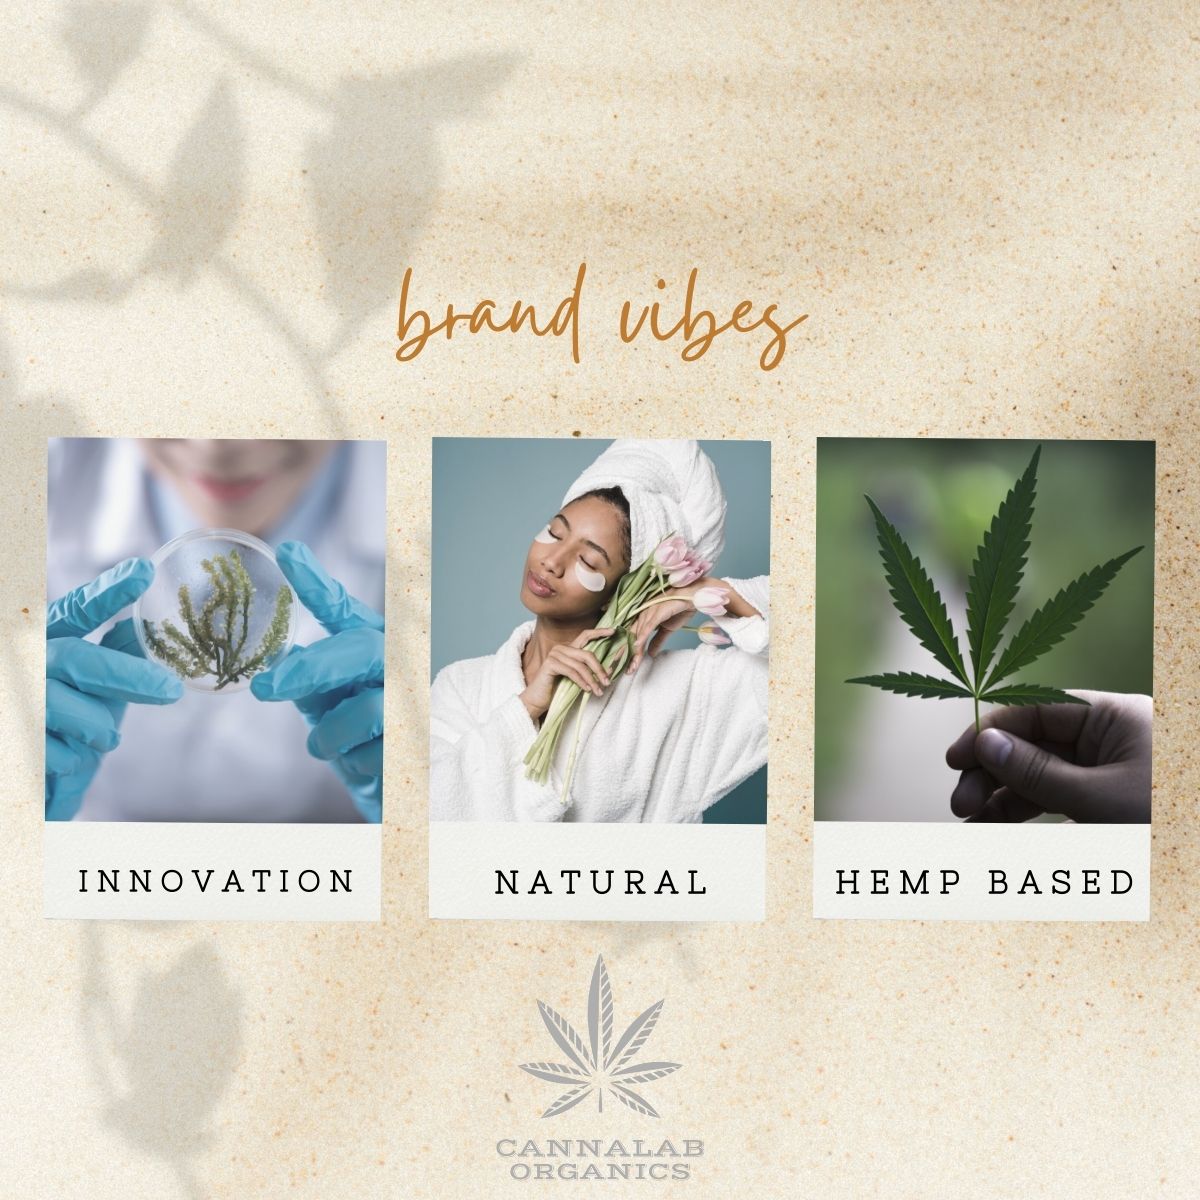 Find out more about Cannalab Organics